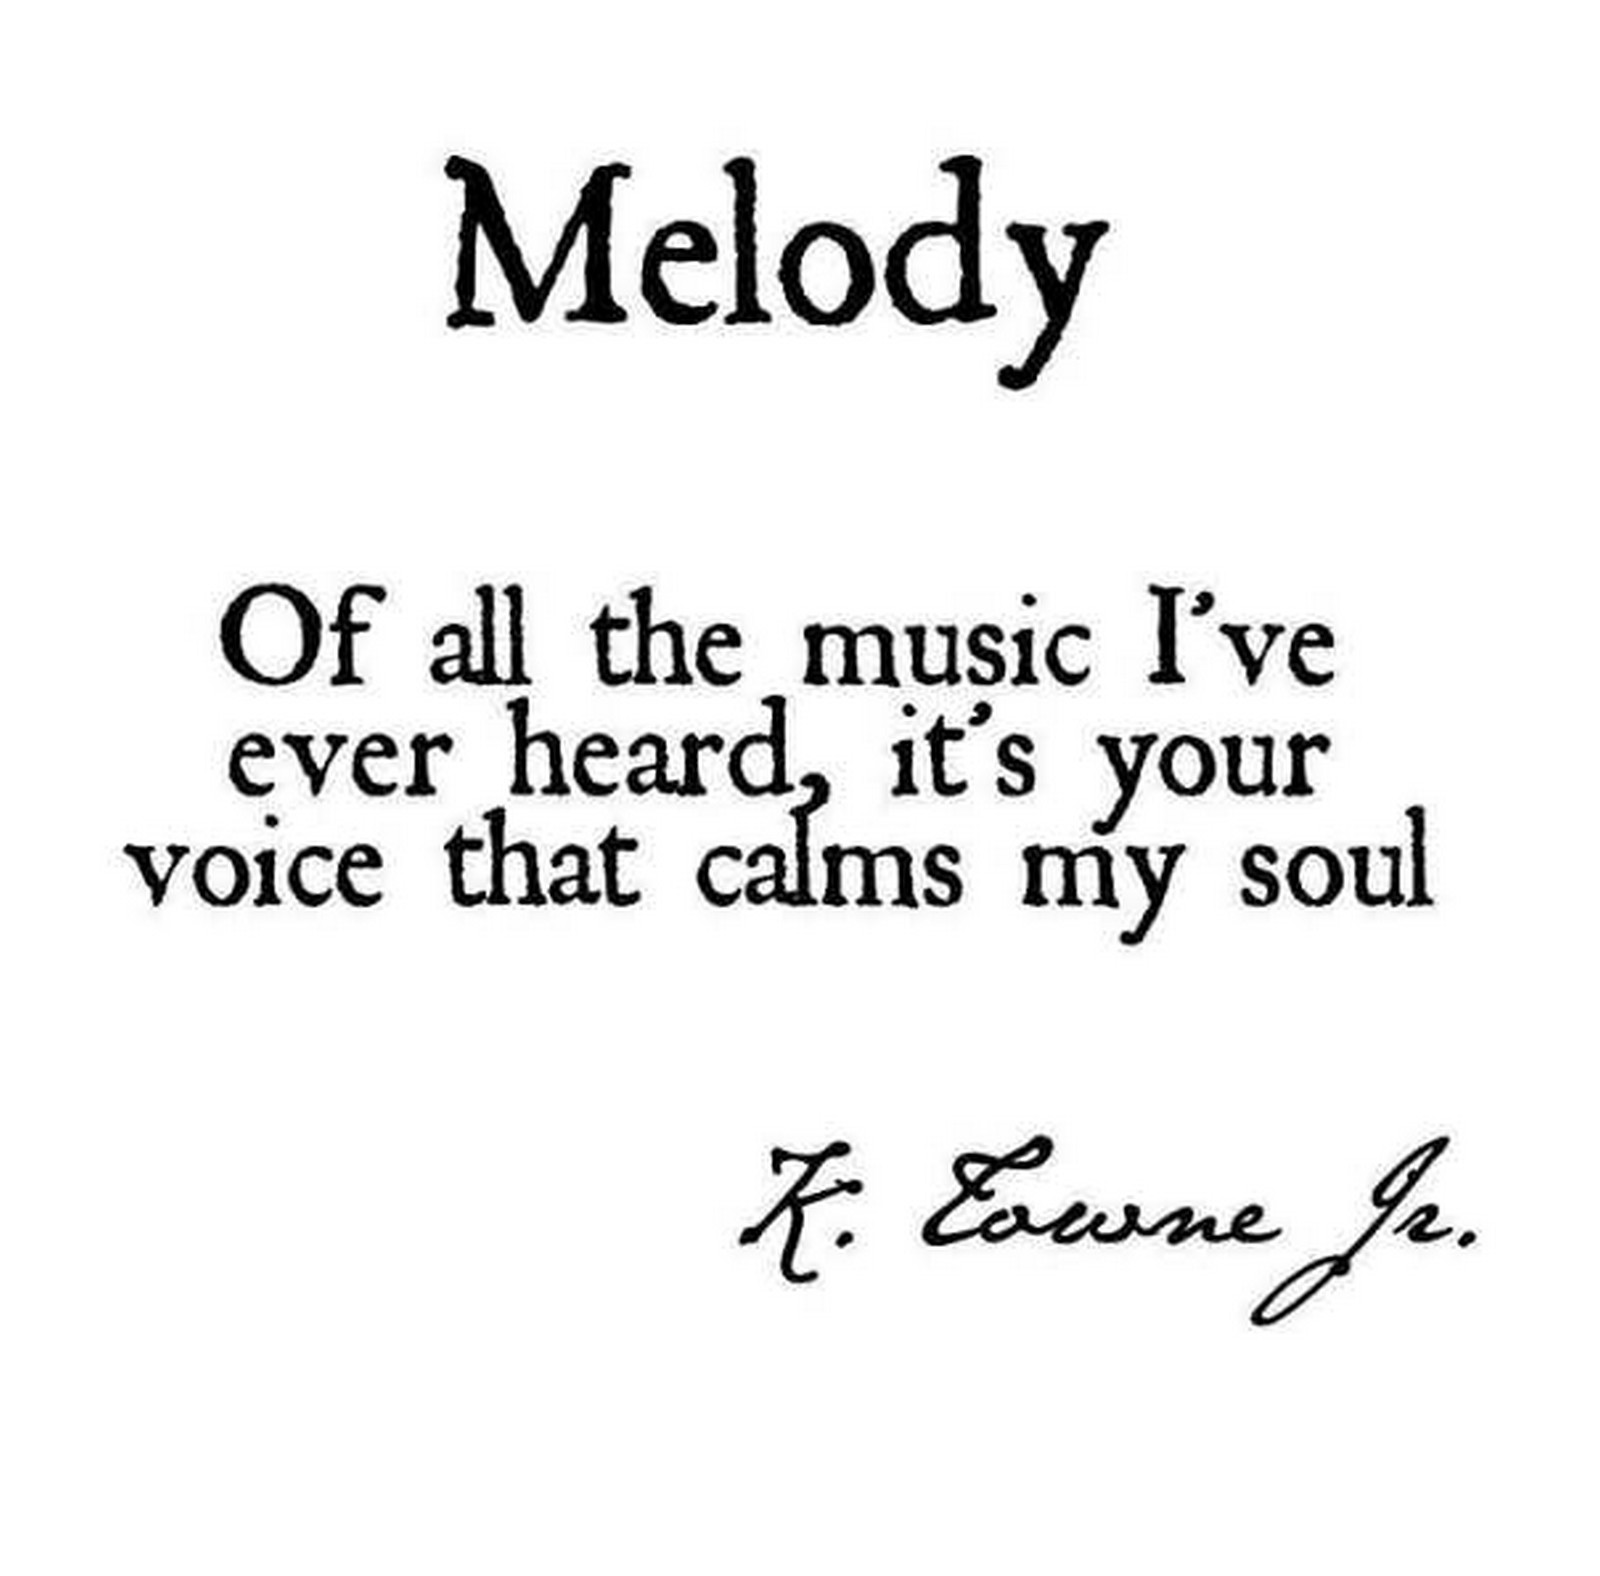 55 Romantic Quotes - "Melody. Of all the music I've ever heard, it's your voice that calms my soul." - K. Towne Jr.